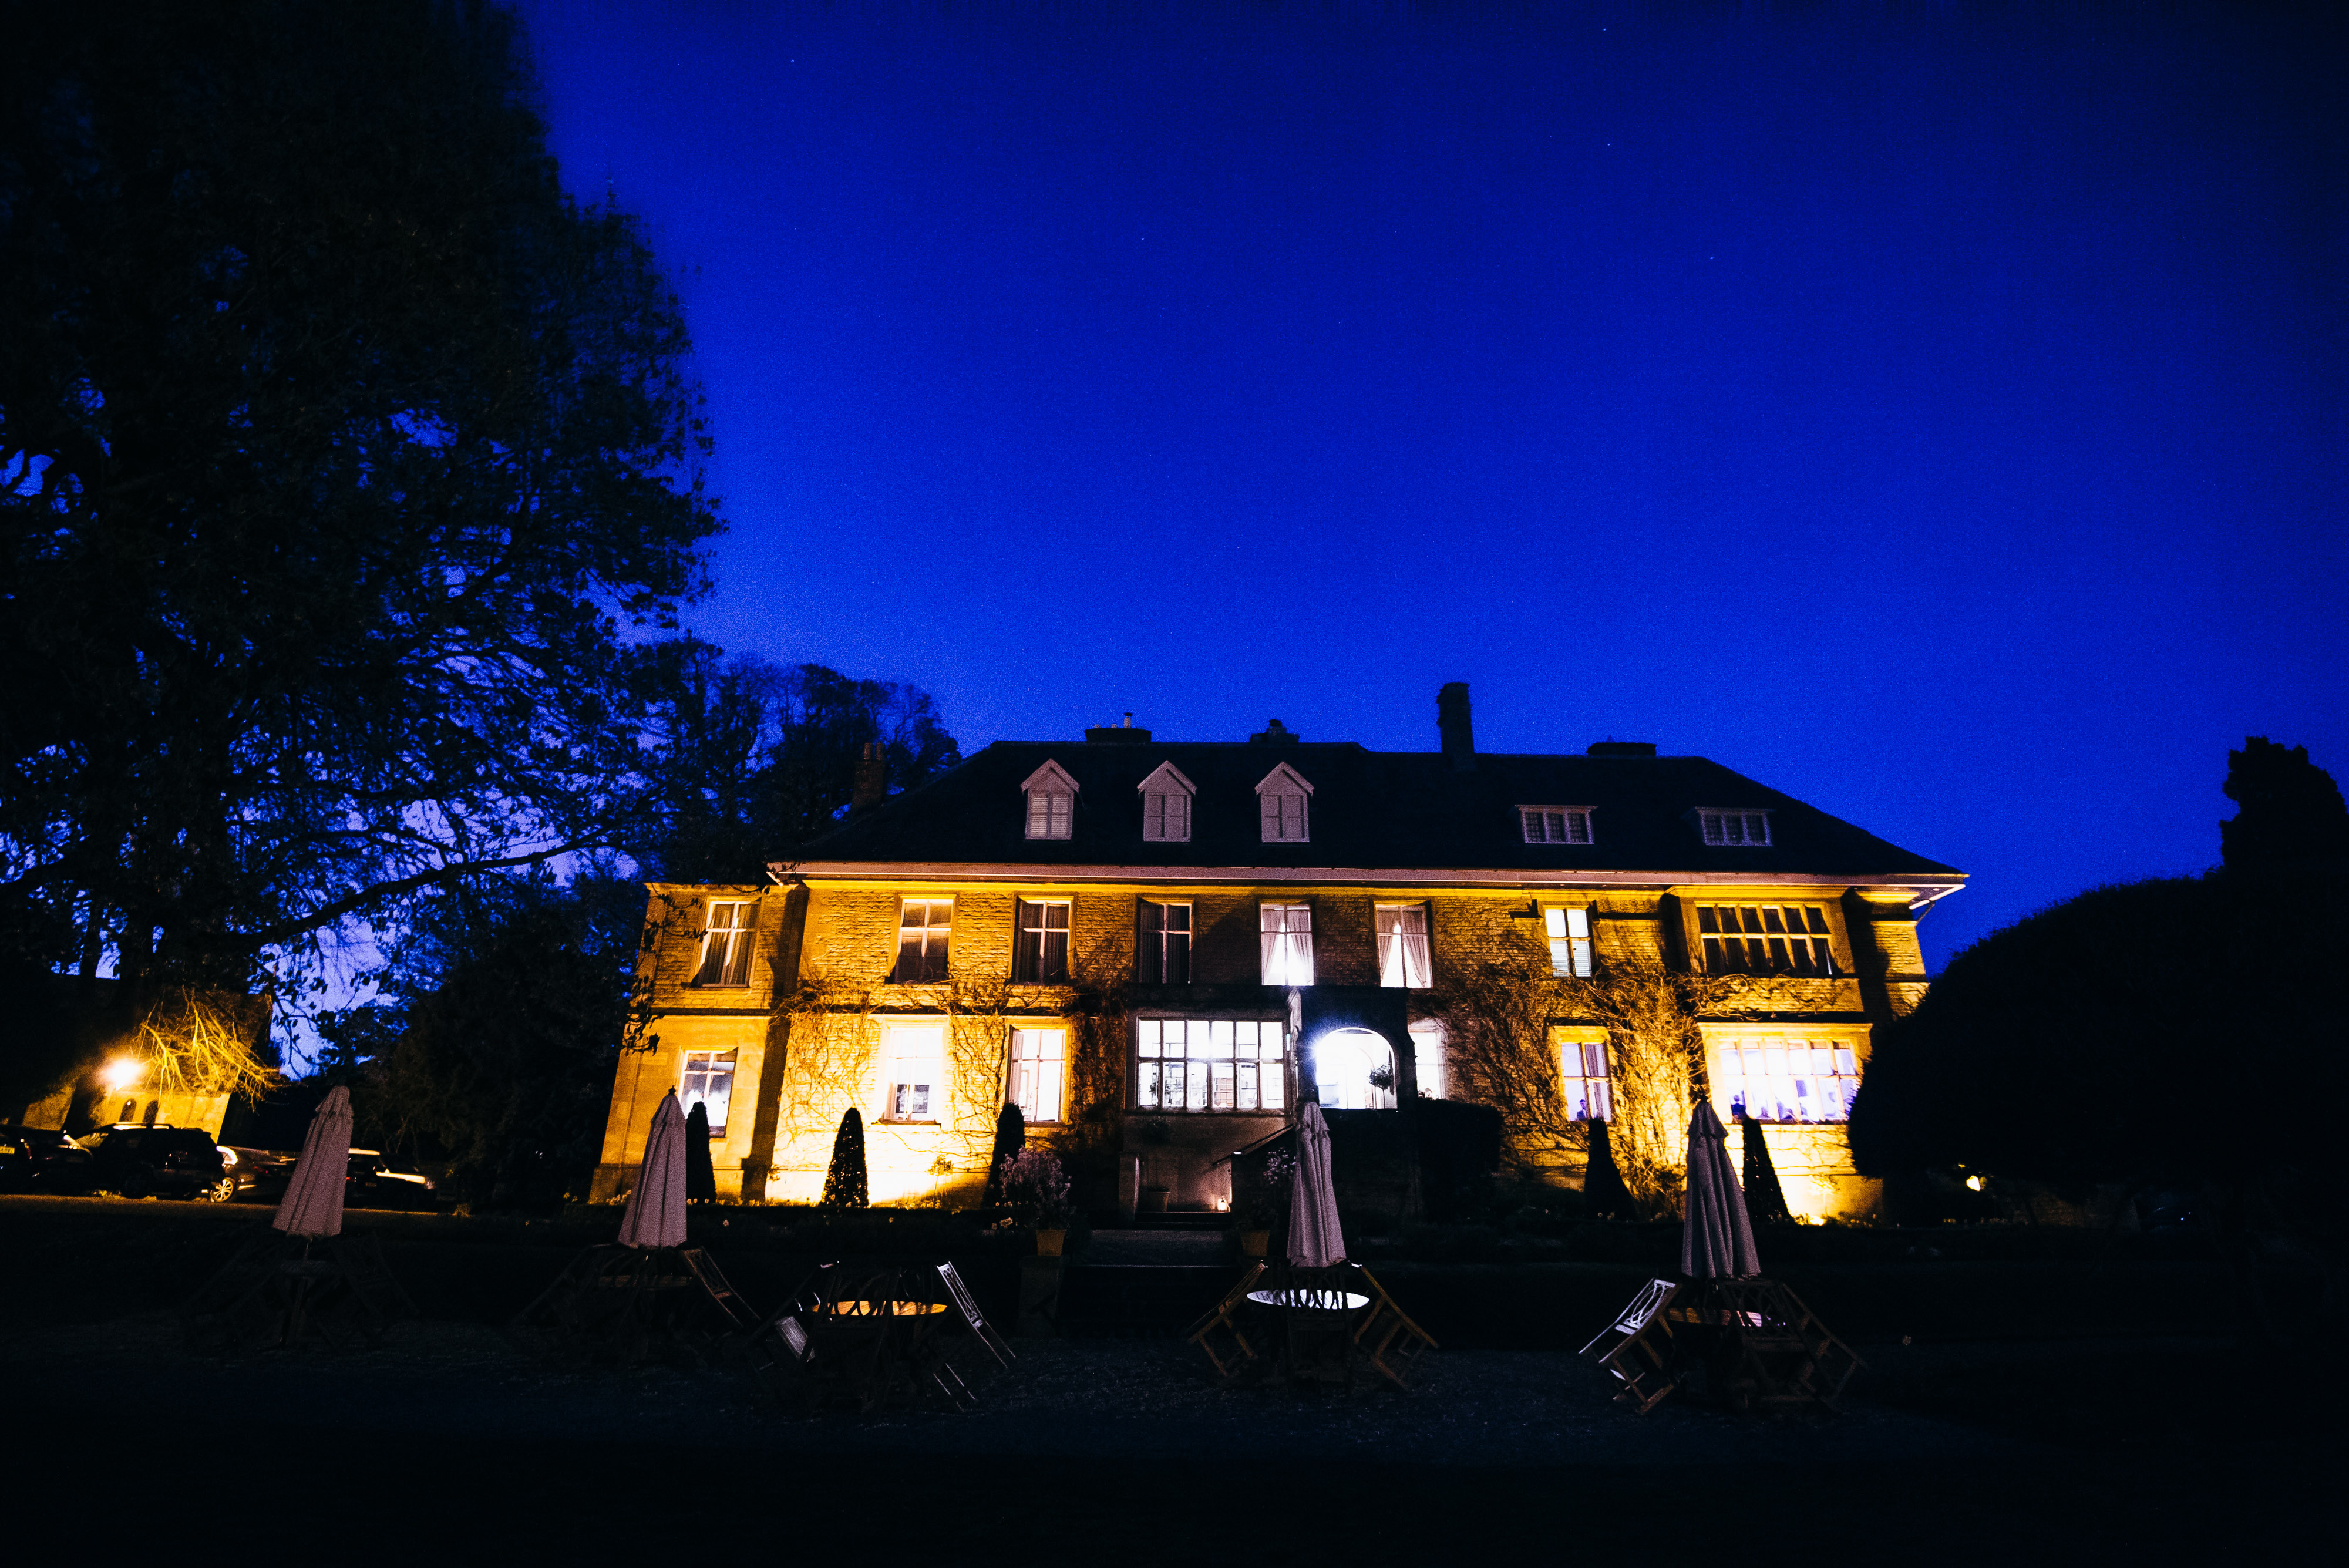 Slaughters Manor House at night